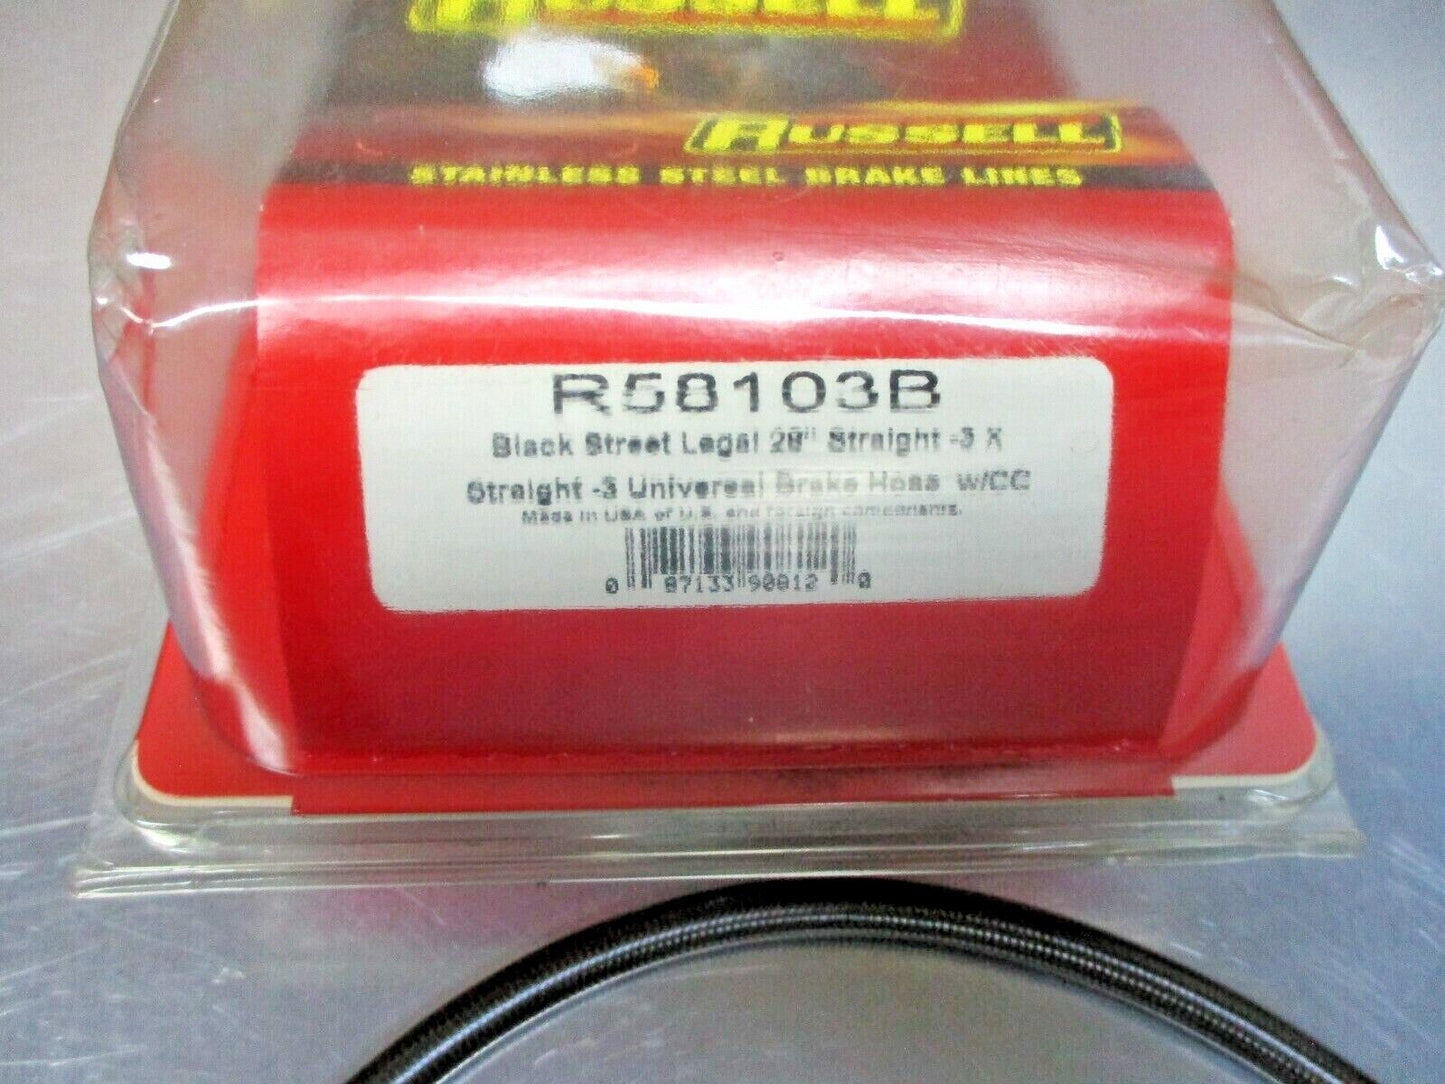 Russell Renegade 28 Inch Universal Brake Line Stainless Straight R58103B